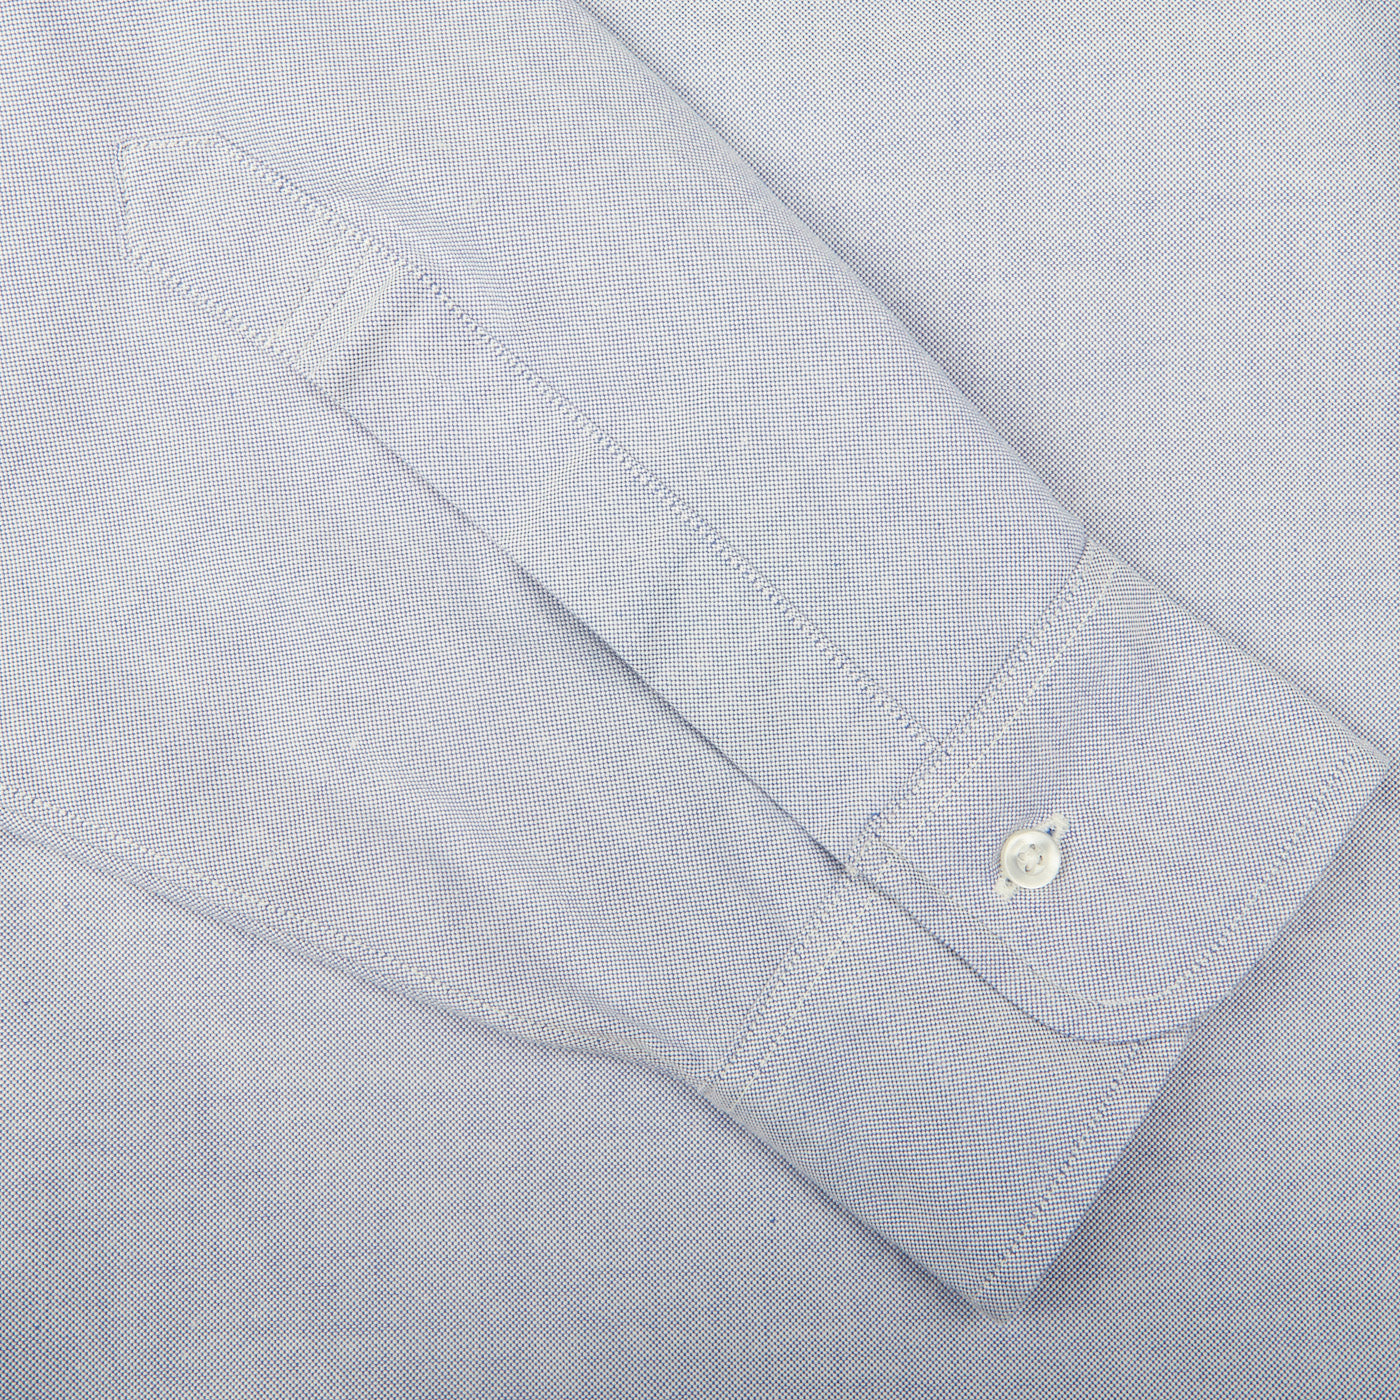 A close up of a Light Blue Cotton Oxford BD Regular Shirt made by Far East Manufacturing.